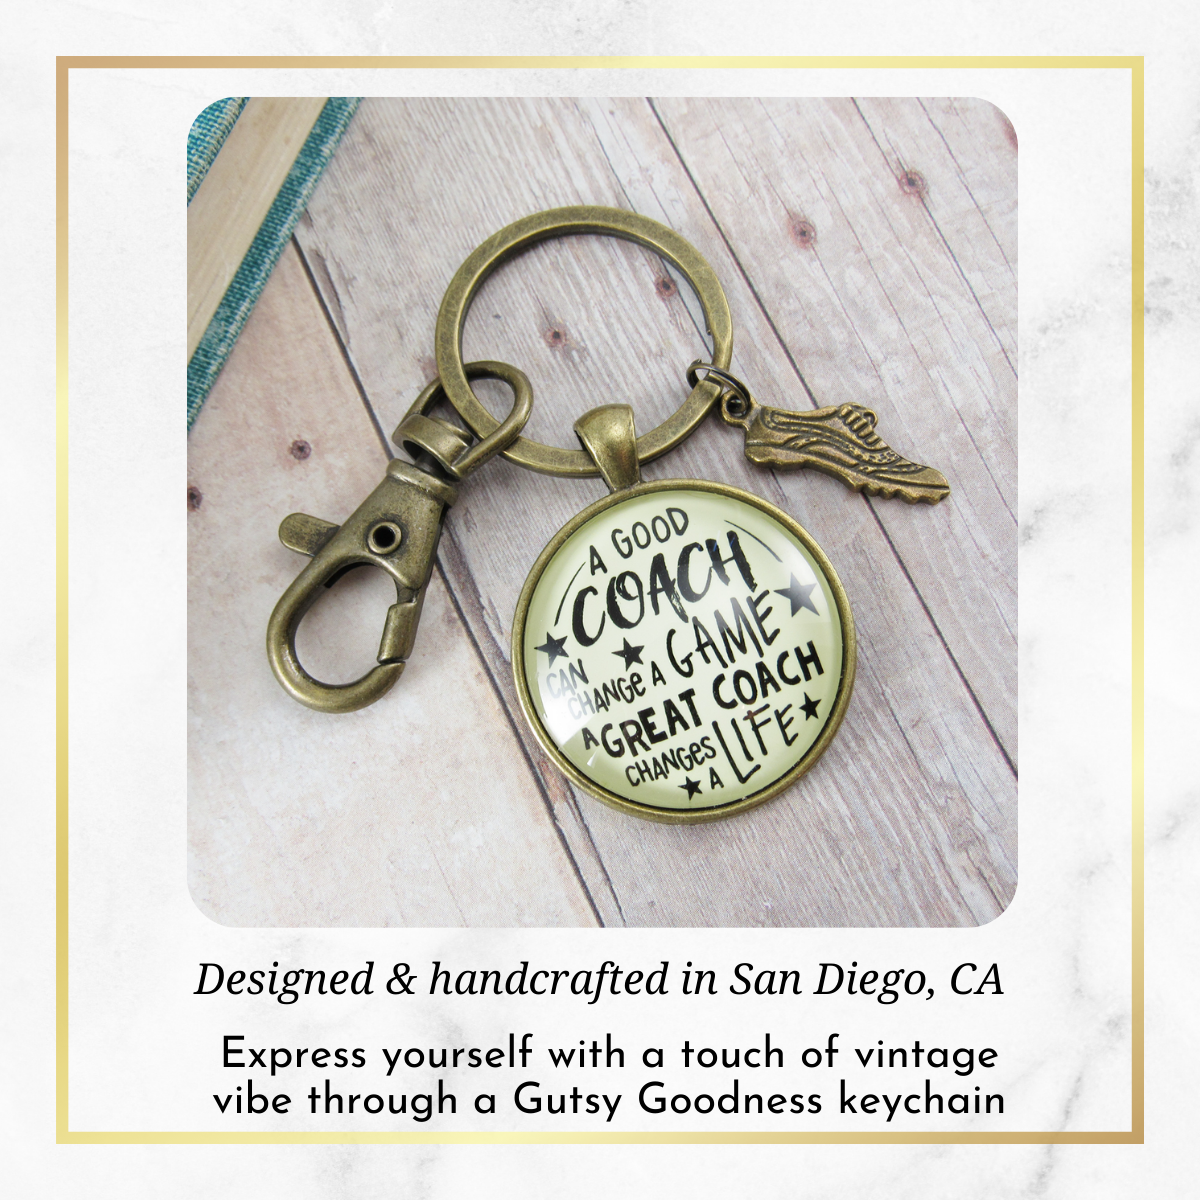 Cross Country Coaching Keychain Great Coach Changes Life Thank You Gift Running Track Shoe - Gutsy Goodness Handmade Jewelry;Cross Country Coaching Keychain Great Coach Changes Life Thank You Gift Running Track Shoe - Gutsy Goodness Handmade Jewelry Gifts